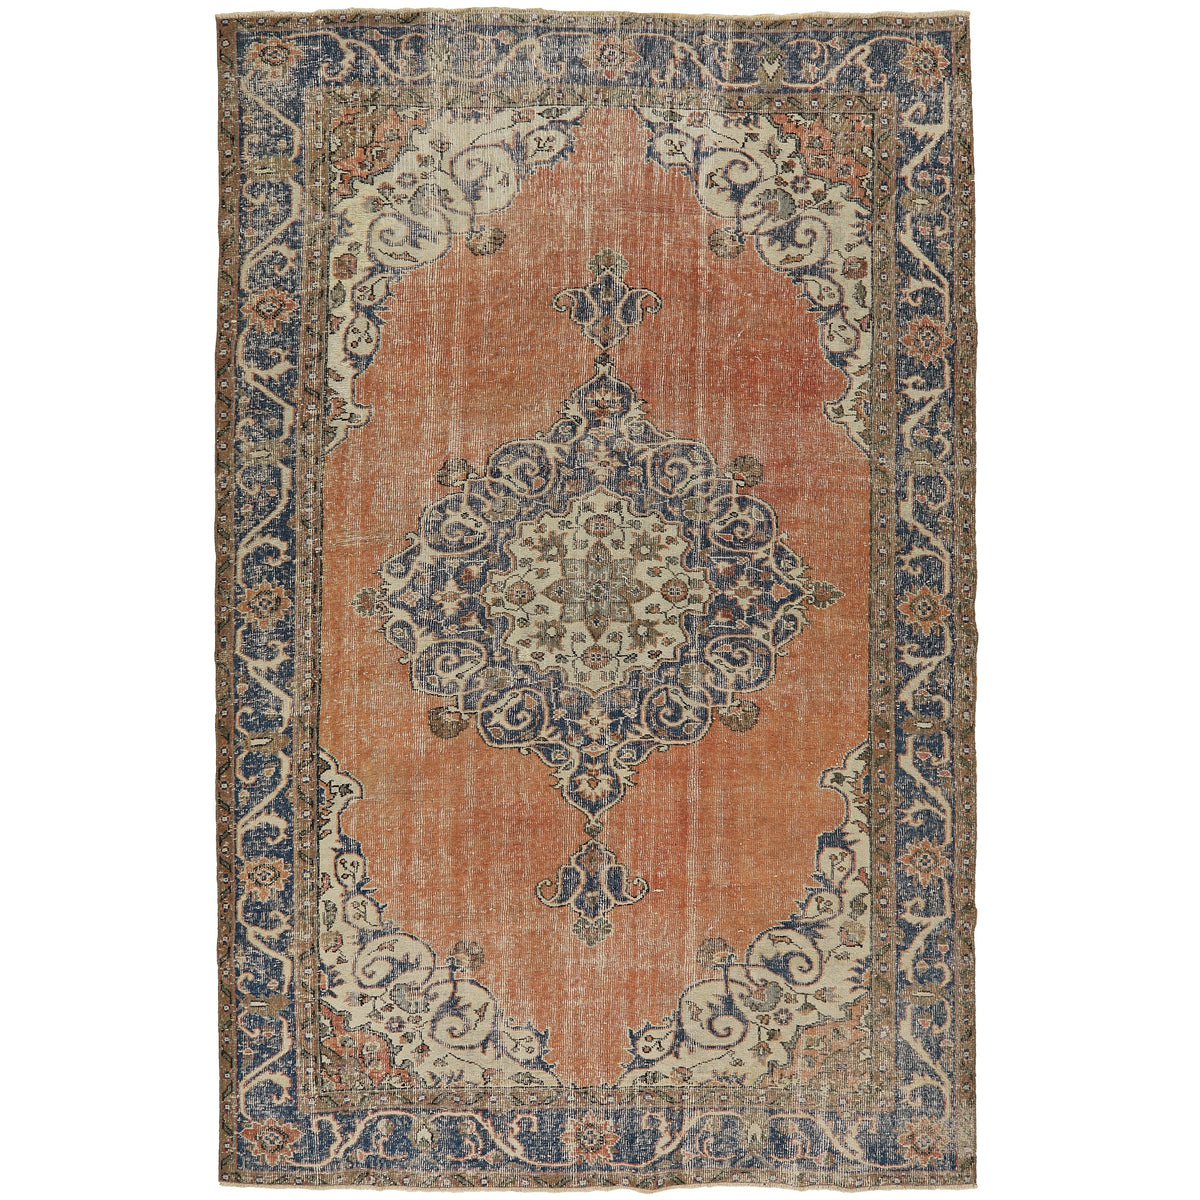 Moira - Turkish Rug Excellence Defined